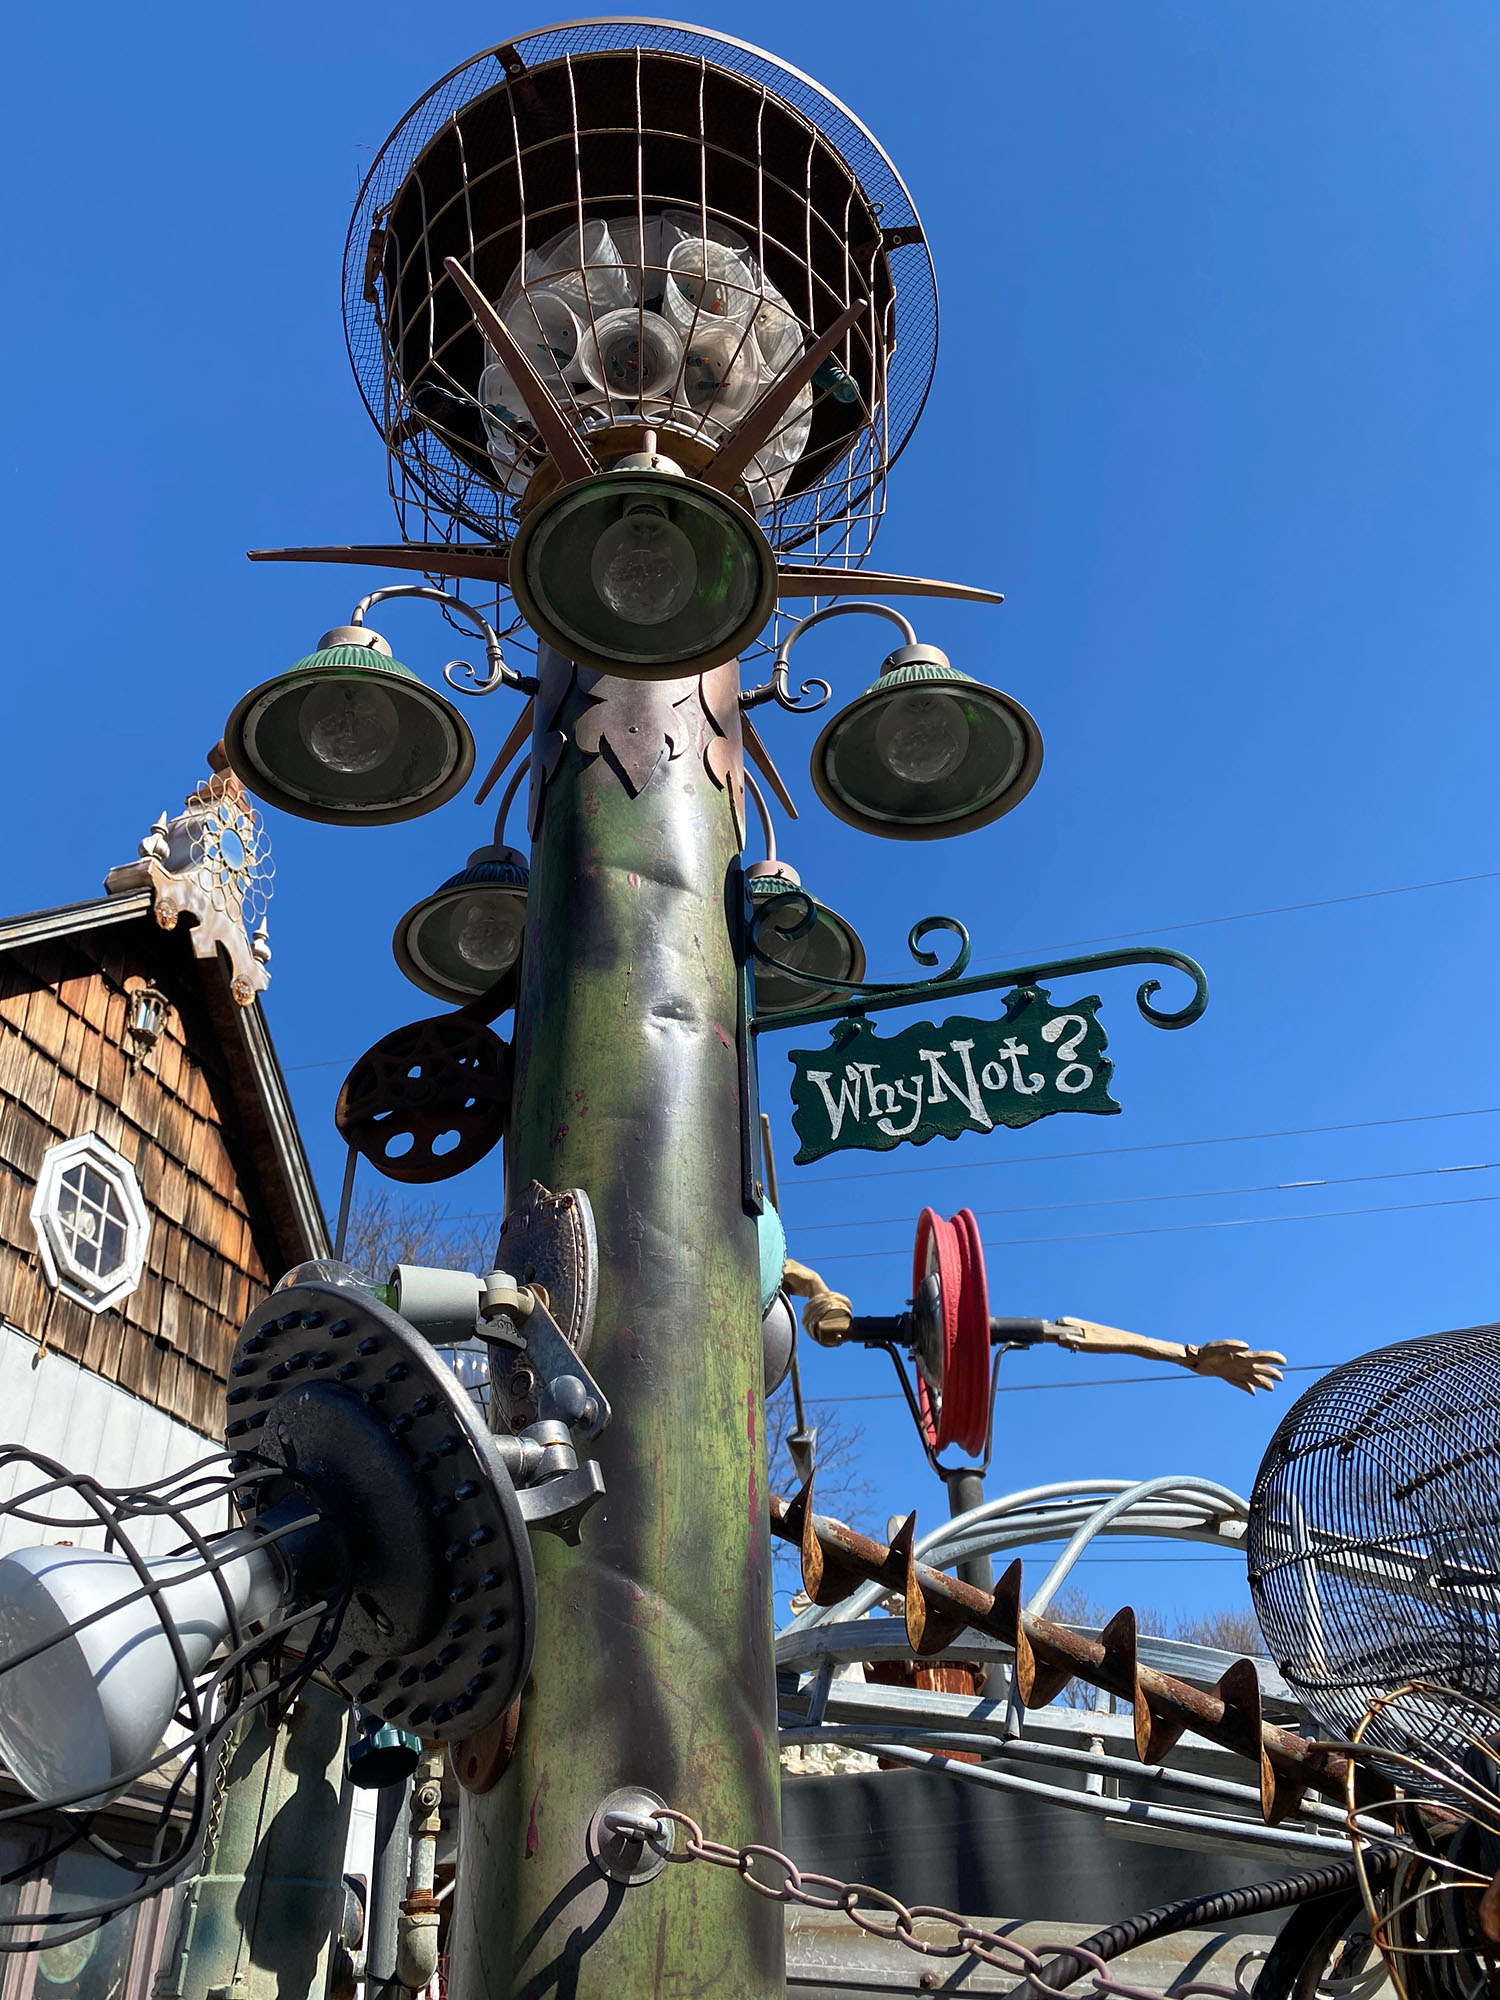 Modified light post sculpture with a sign that says "Why Not?" at Gary Pendergrass' steampunk art installation in Wichita, Kansas